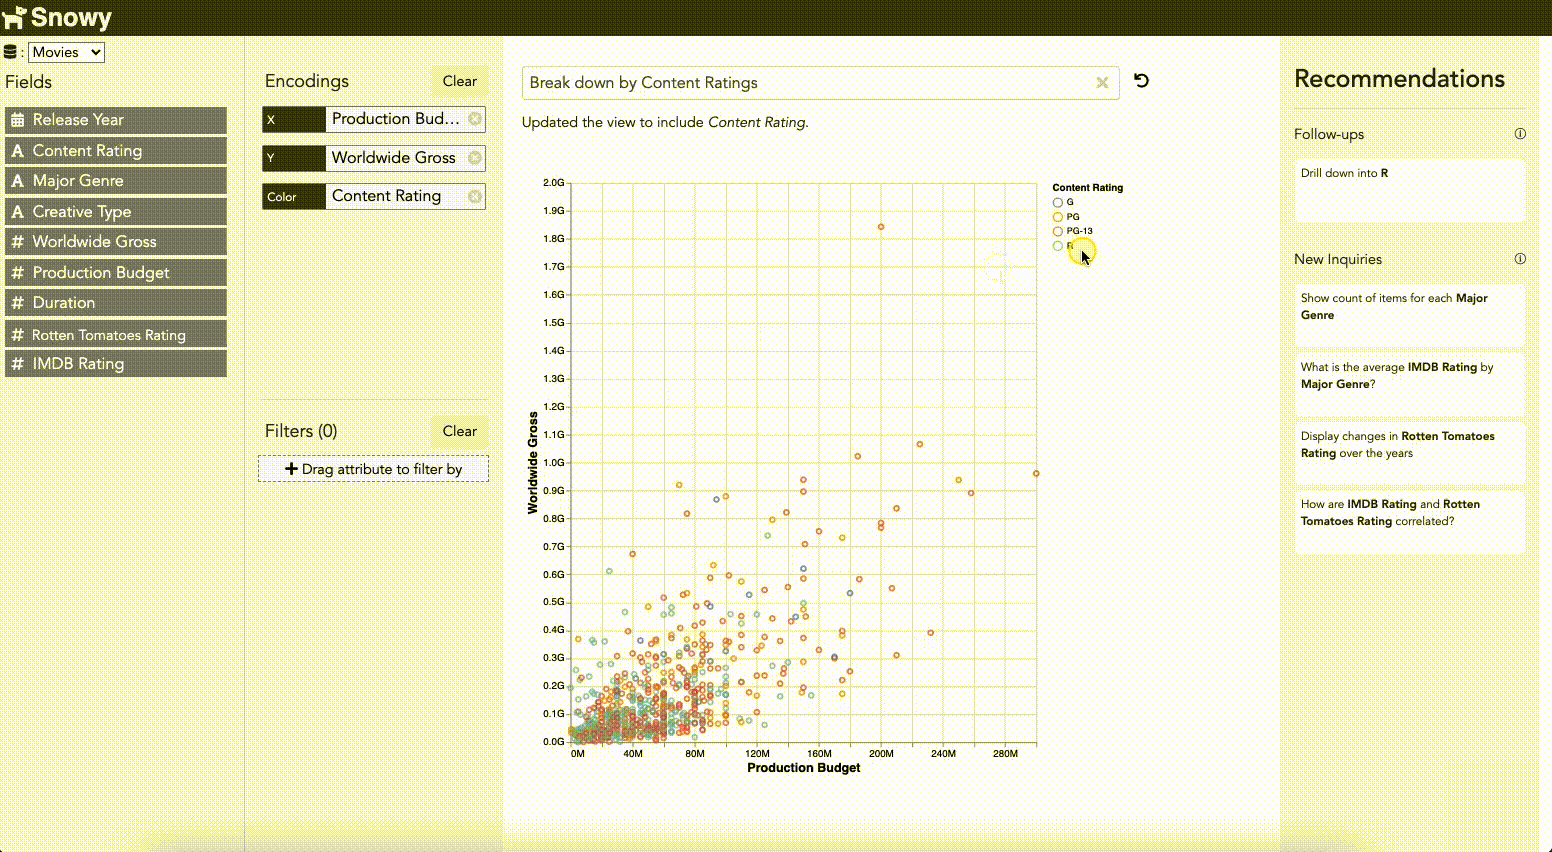 As_Tintin_Selects_Points_on_the_Scatterplot